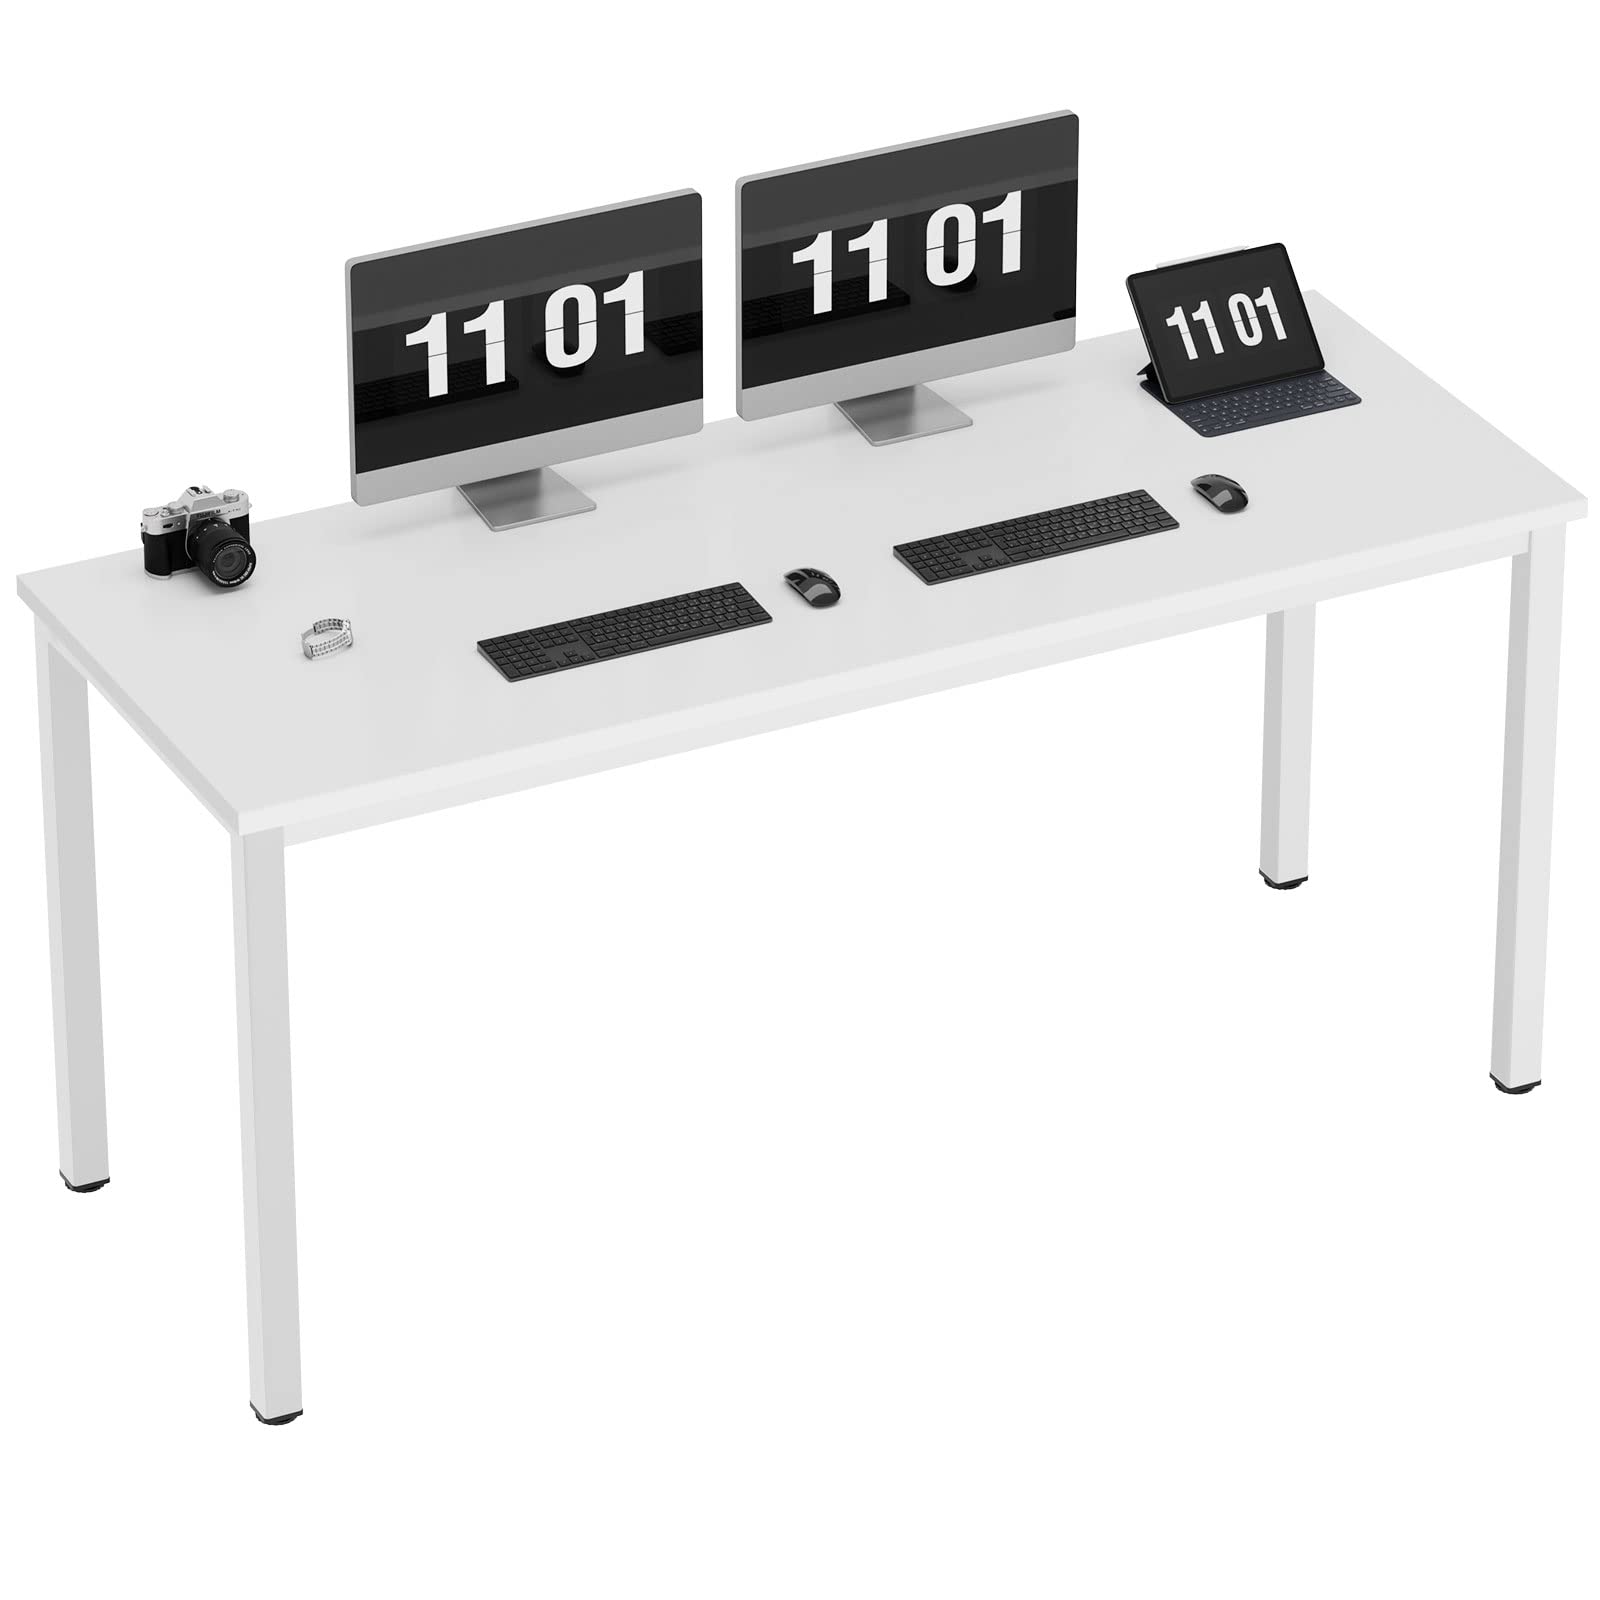 **Price Drop** 63" Need Wooden Computer Desk w/ Metal Frame (White) $84 + Free Shipping